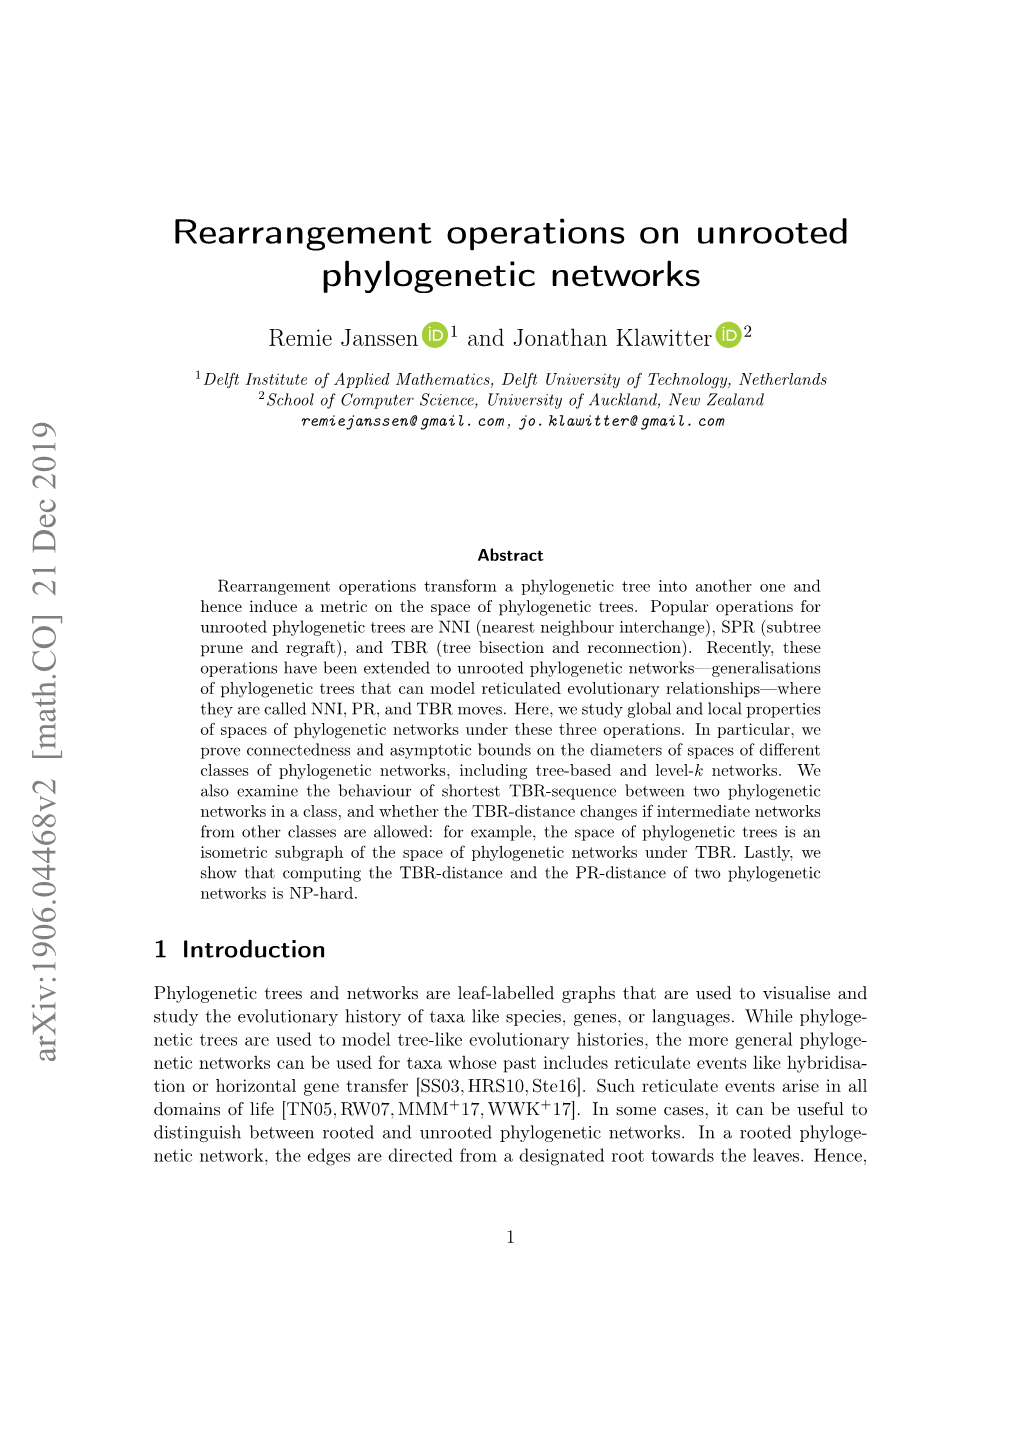 Rearrangement Operations on Unrooted Phylogenetic Networks